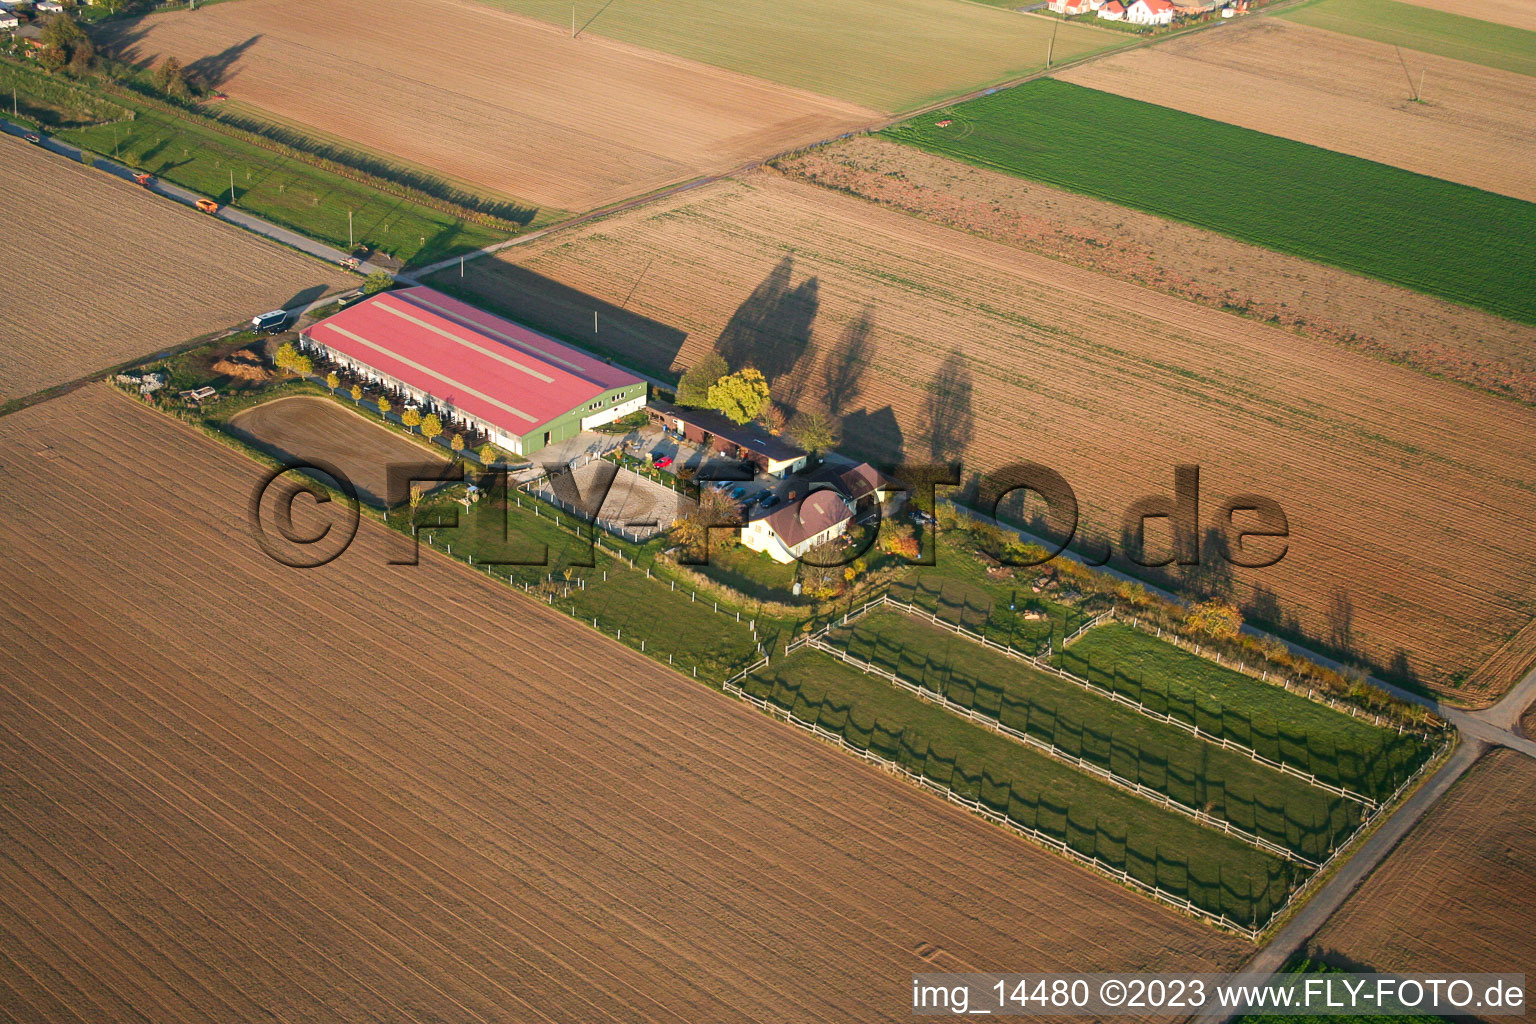 Foal yard in Steinweiler in the state Rhineland-Palatinate, Germany from above